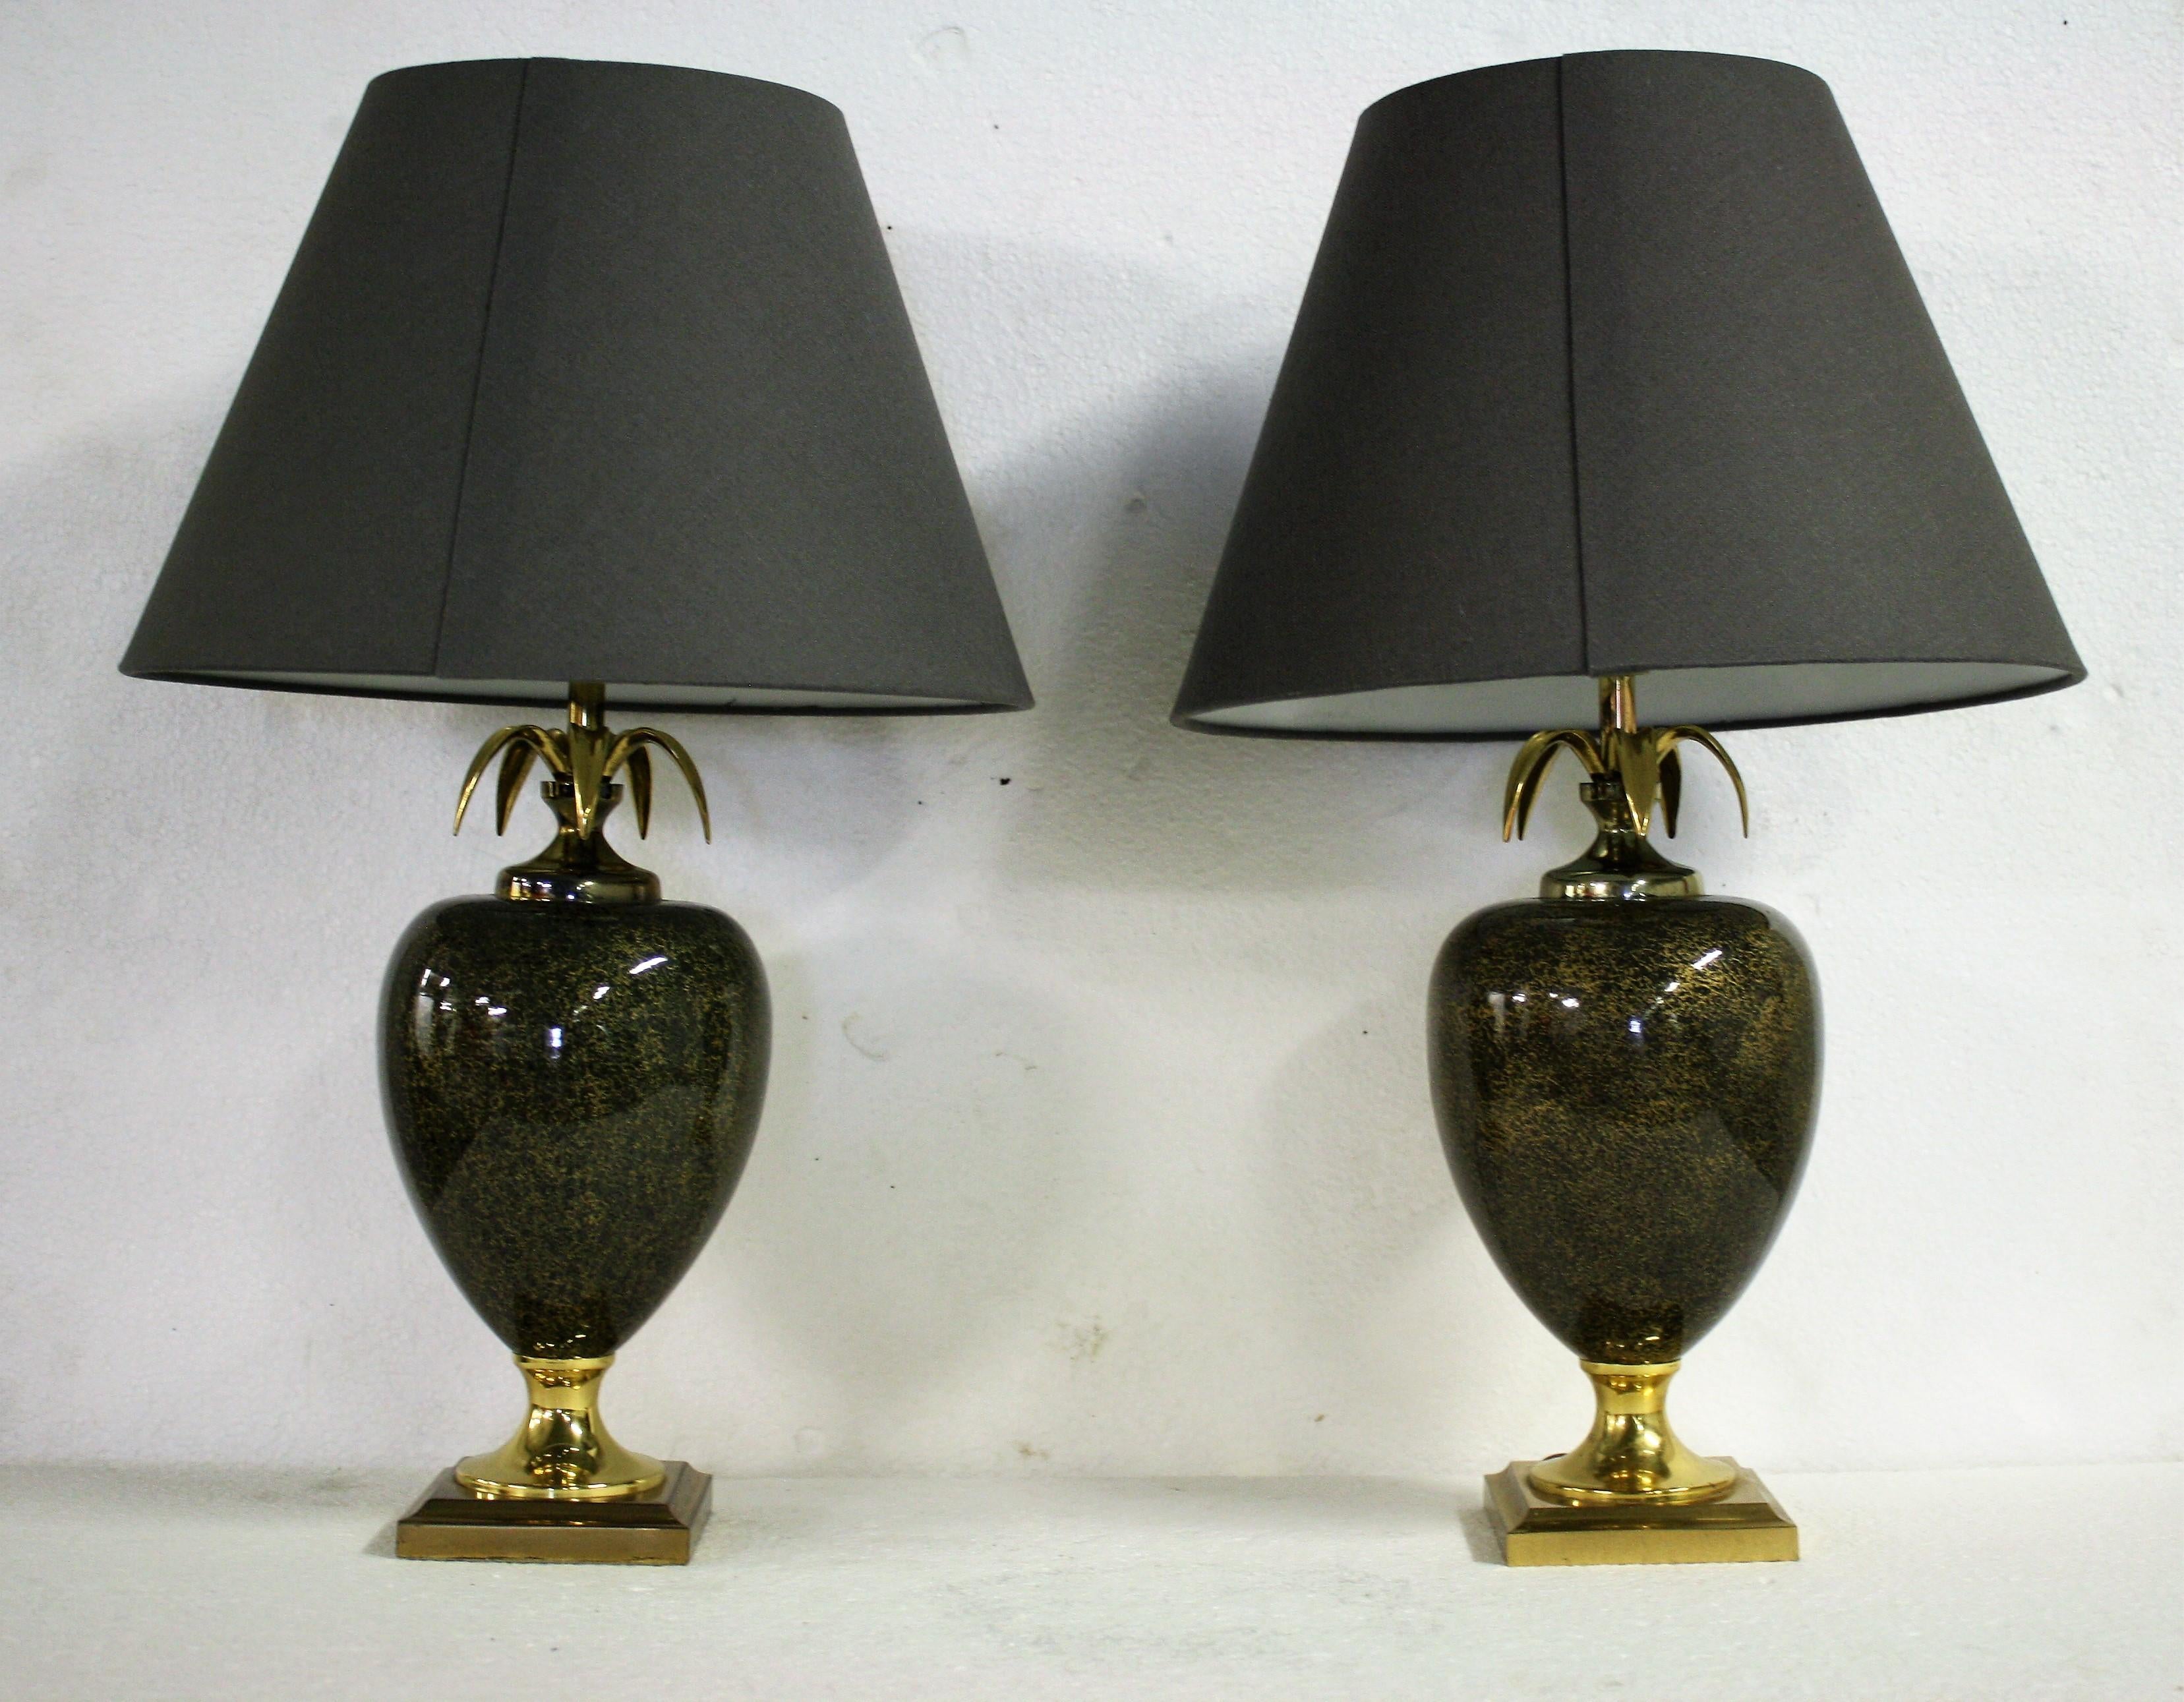 Beautiful brass and black metal pineapple table lamps by Maison Le Dauphin.

These luxurious lamps have an egg shaped center piece with golden accents finished with brass pineapple leafs.

The lamps are beautiful pieces in excellent